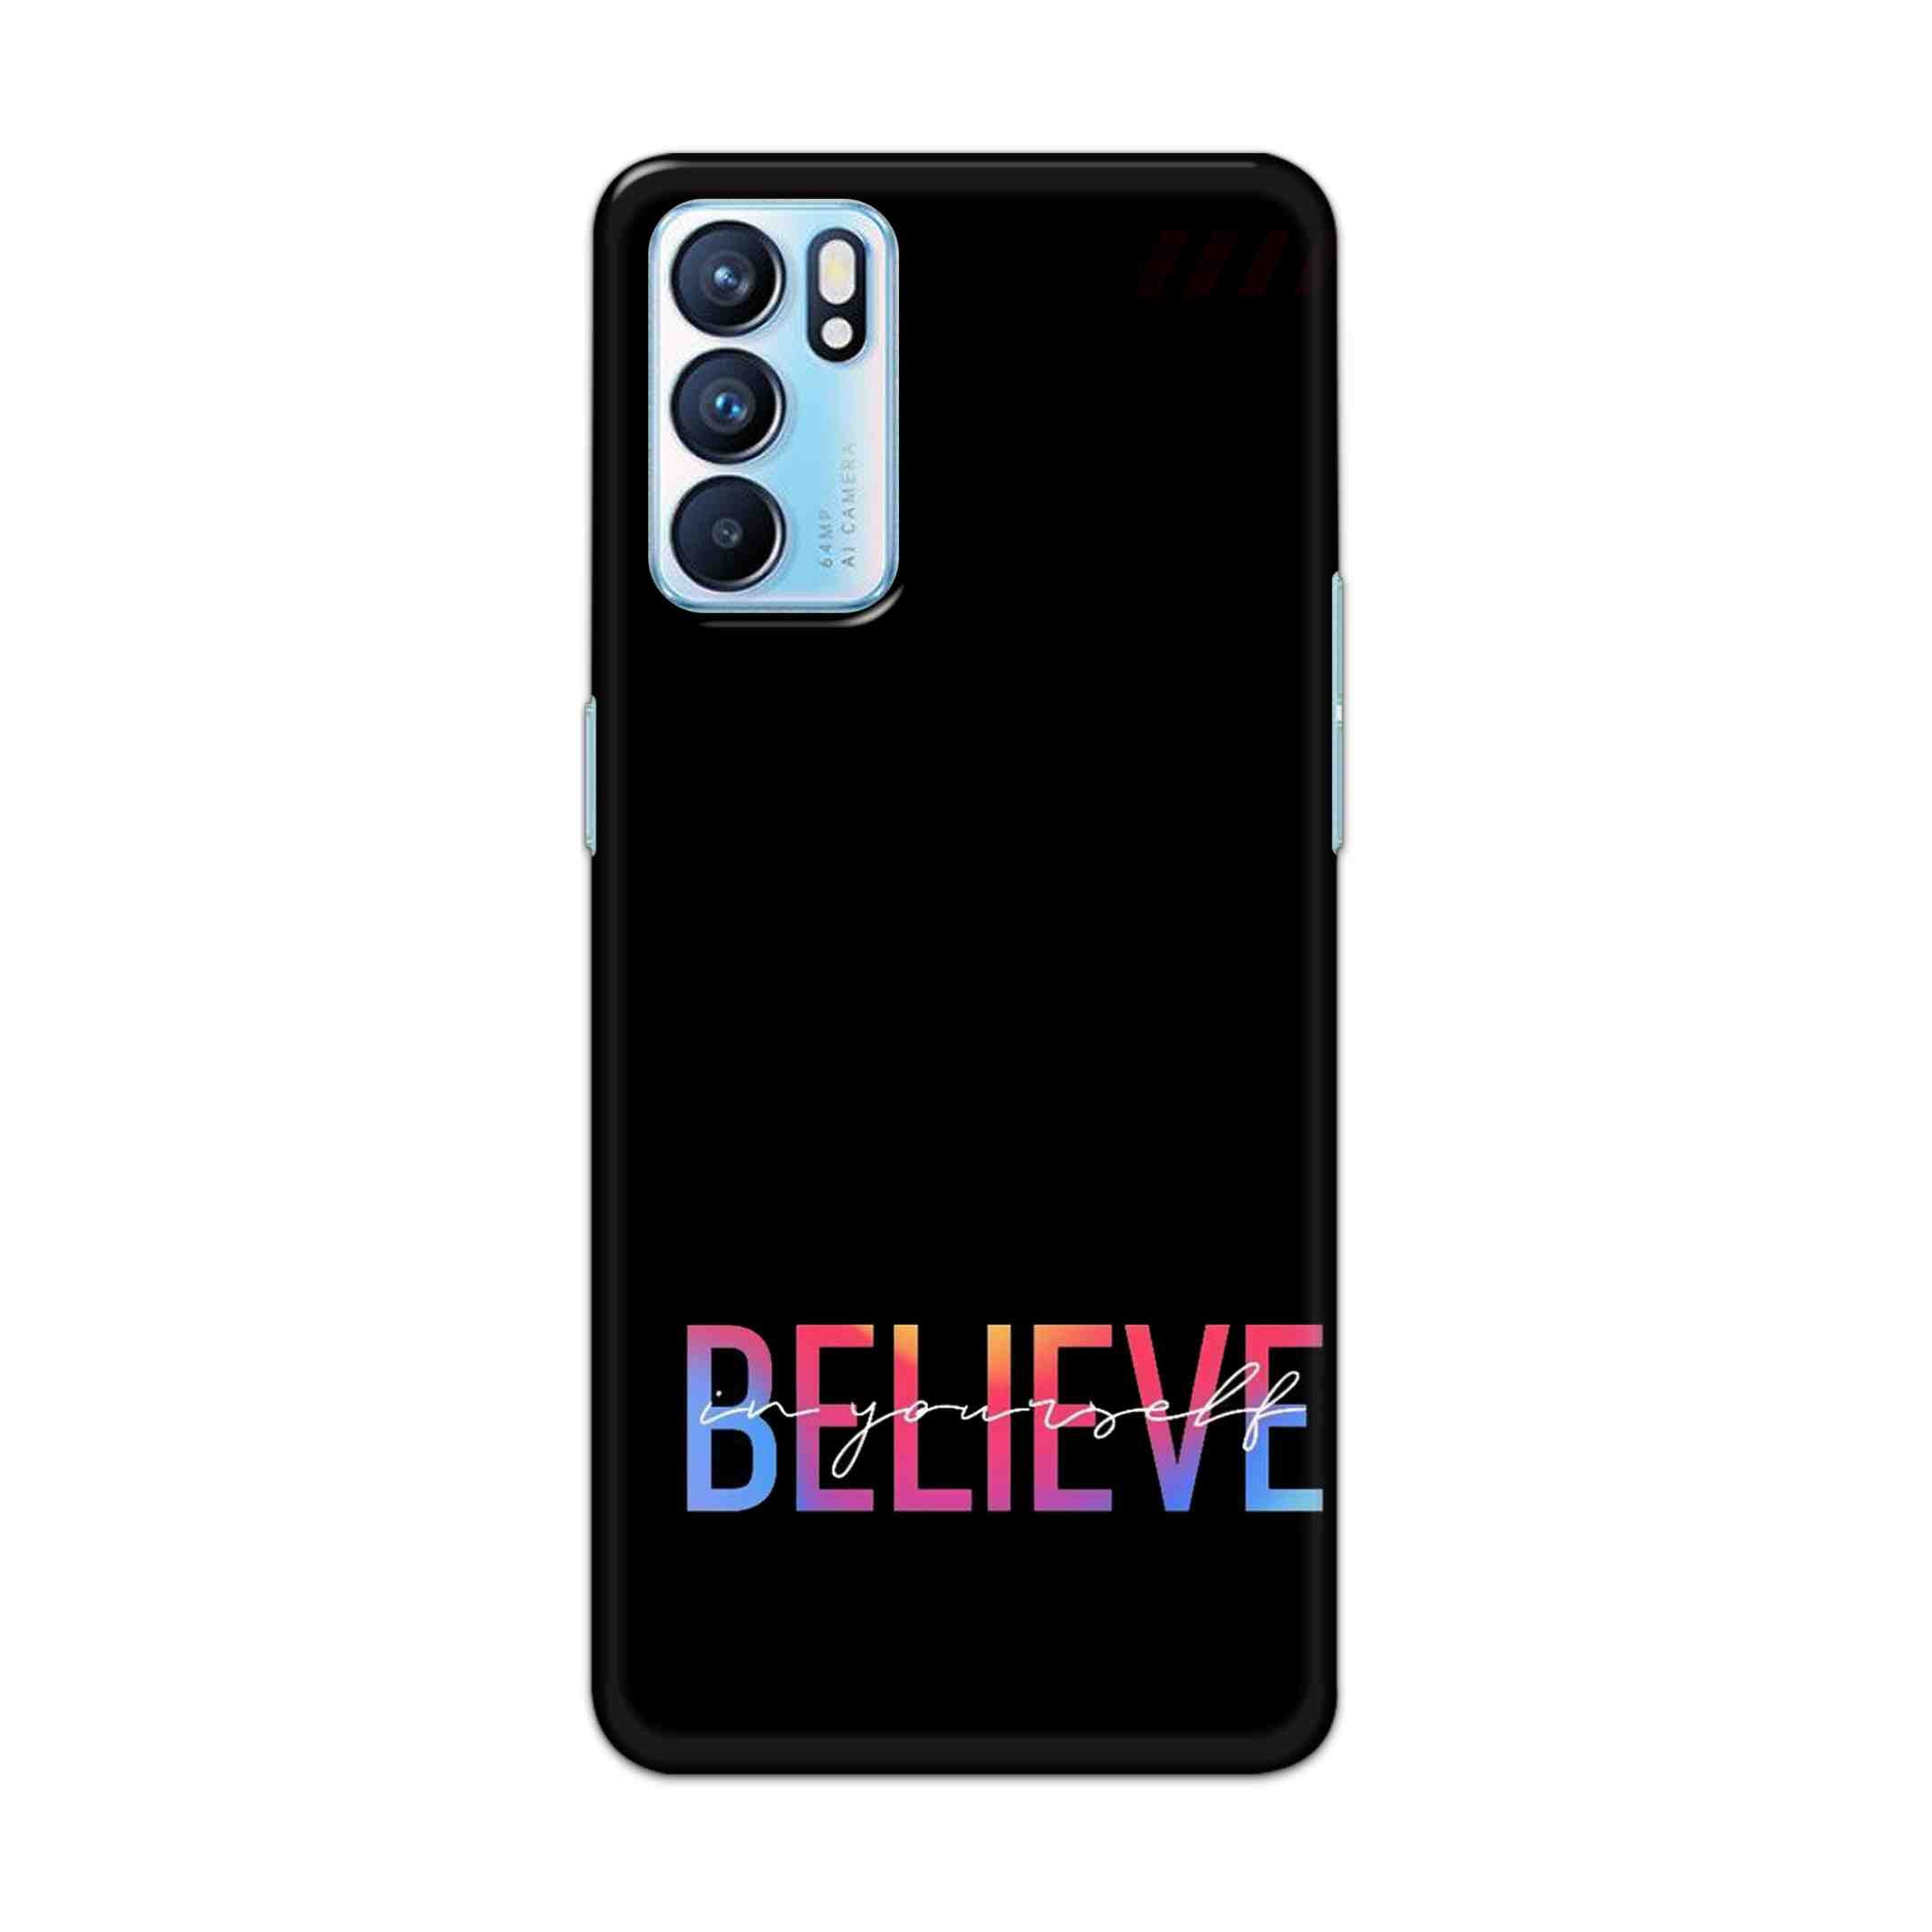 Buy Believe Hard Back Mobile Phone Case Cover For OPPO RENO 6 5G Online